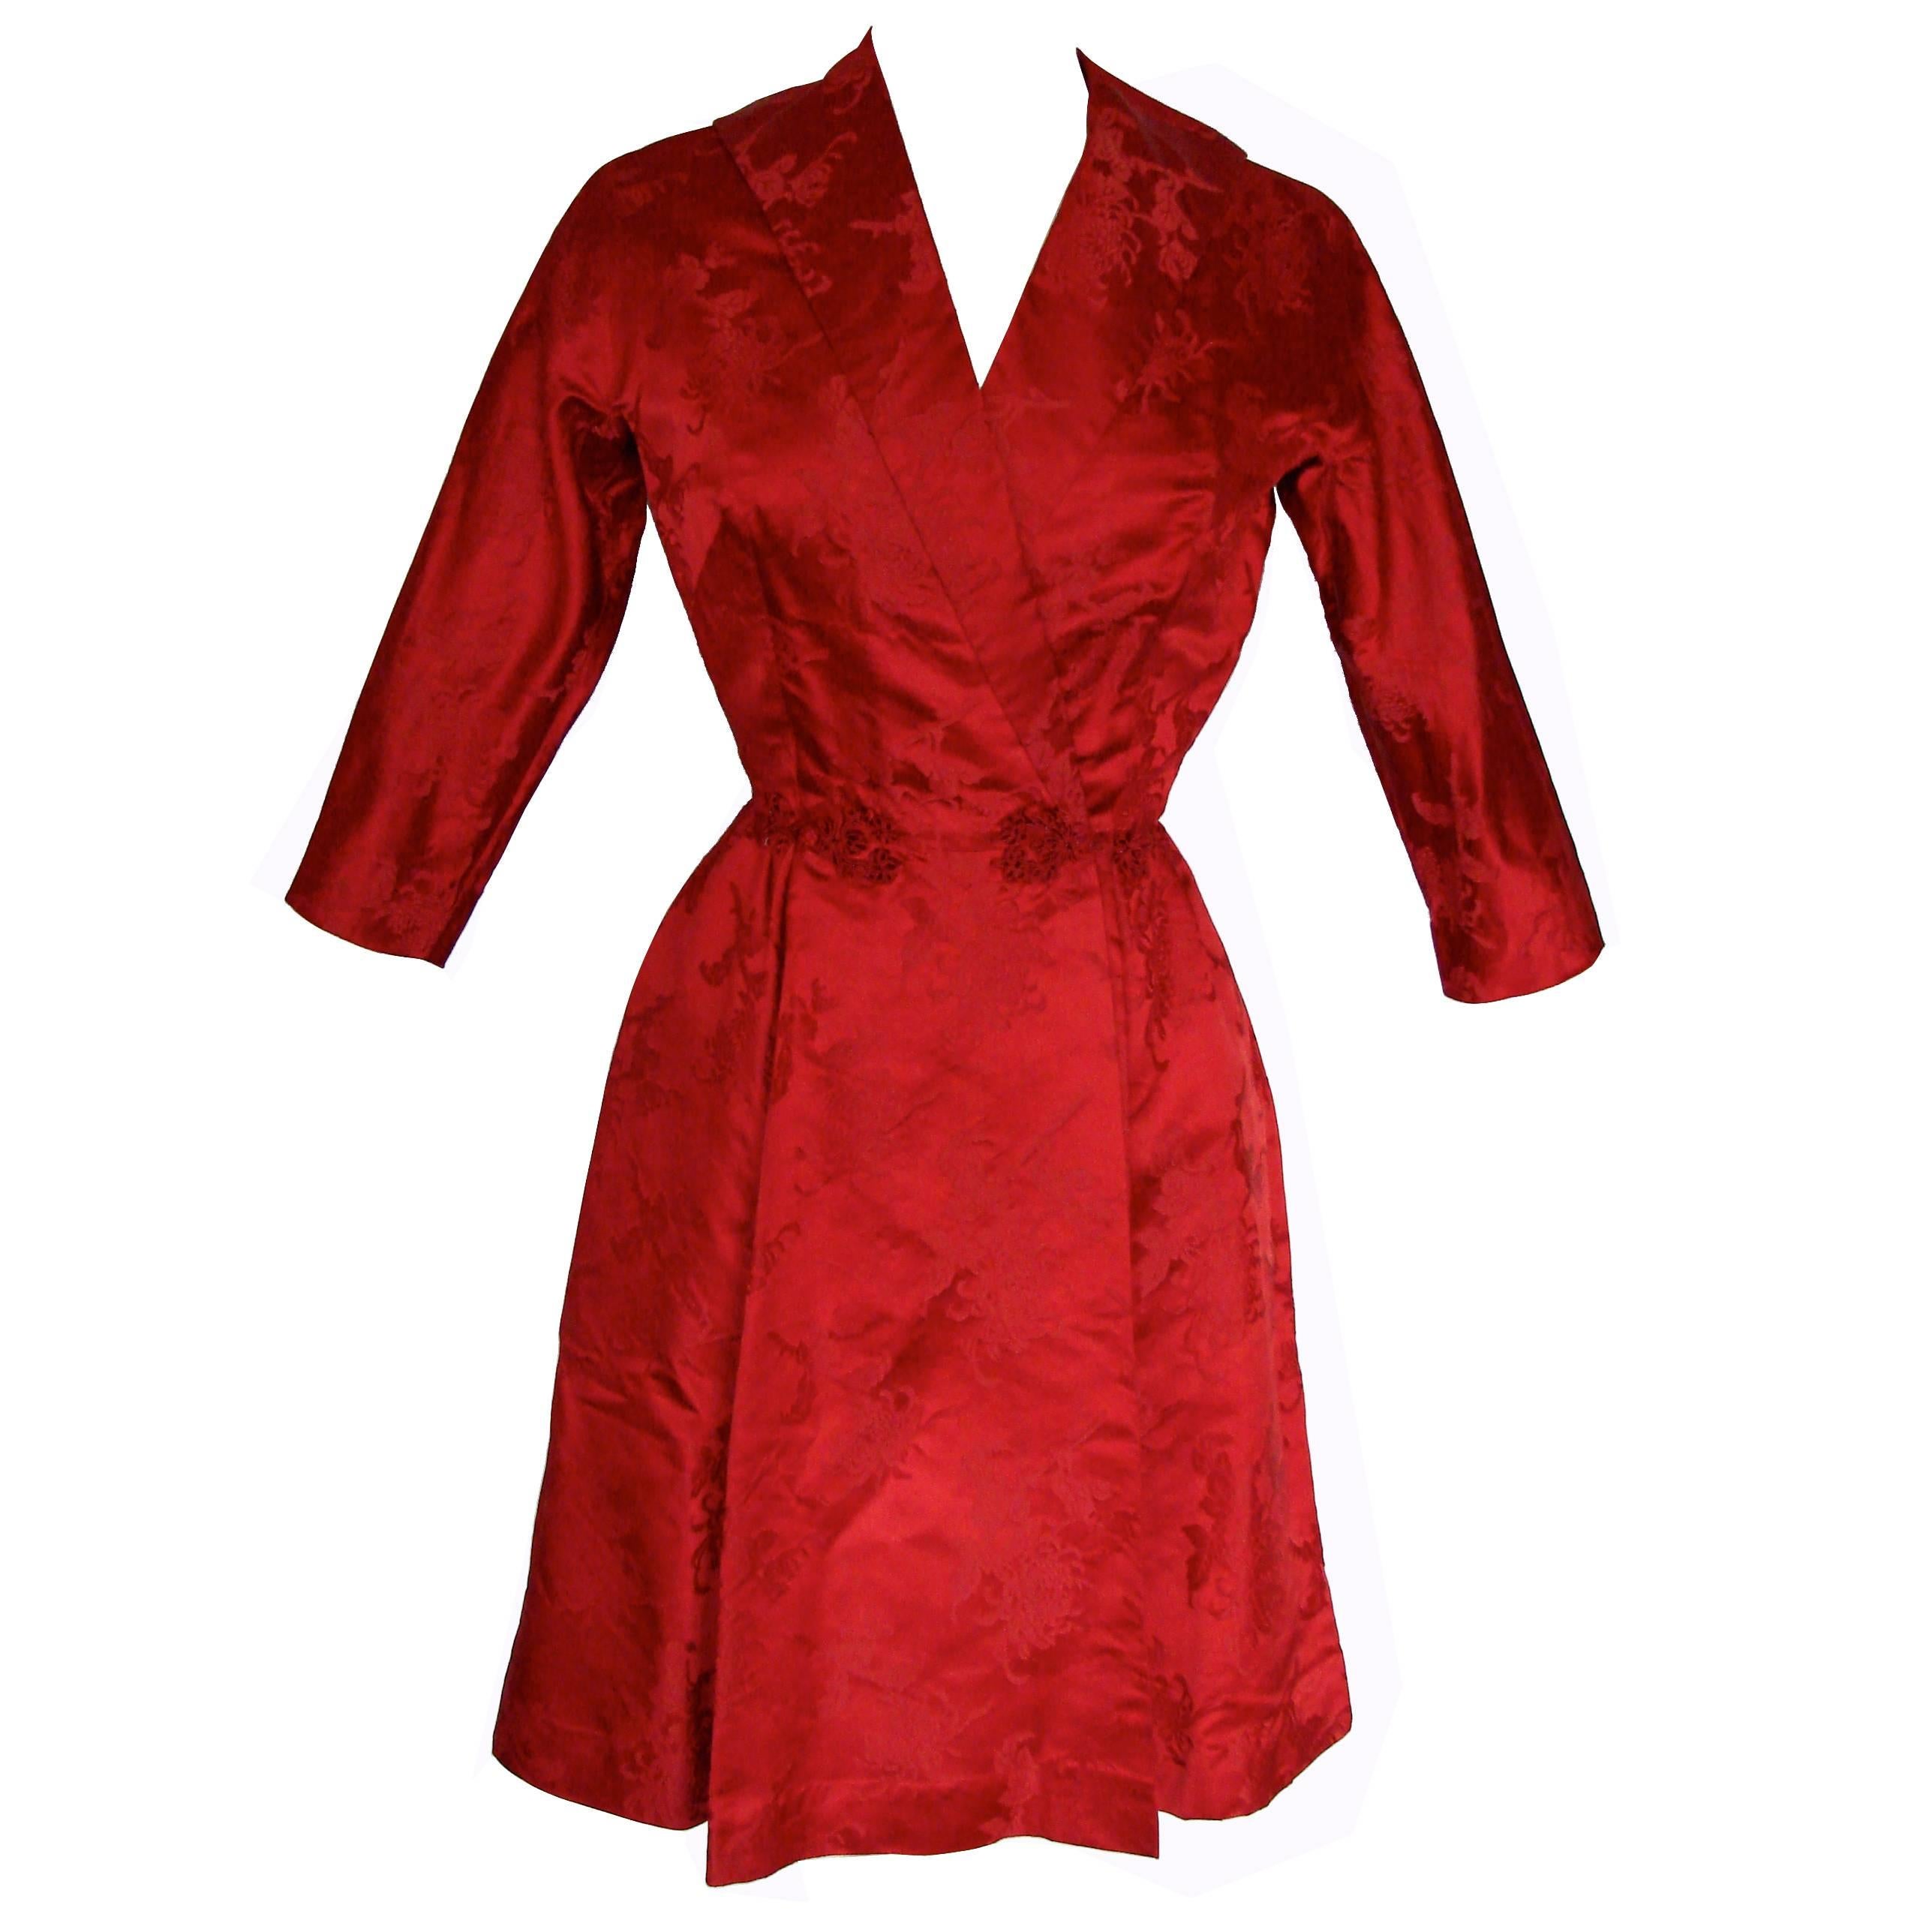 Dynasty for Lord & Taylor Vivid Red Silk Dress with Flared Skirt 1960s Size M